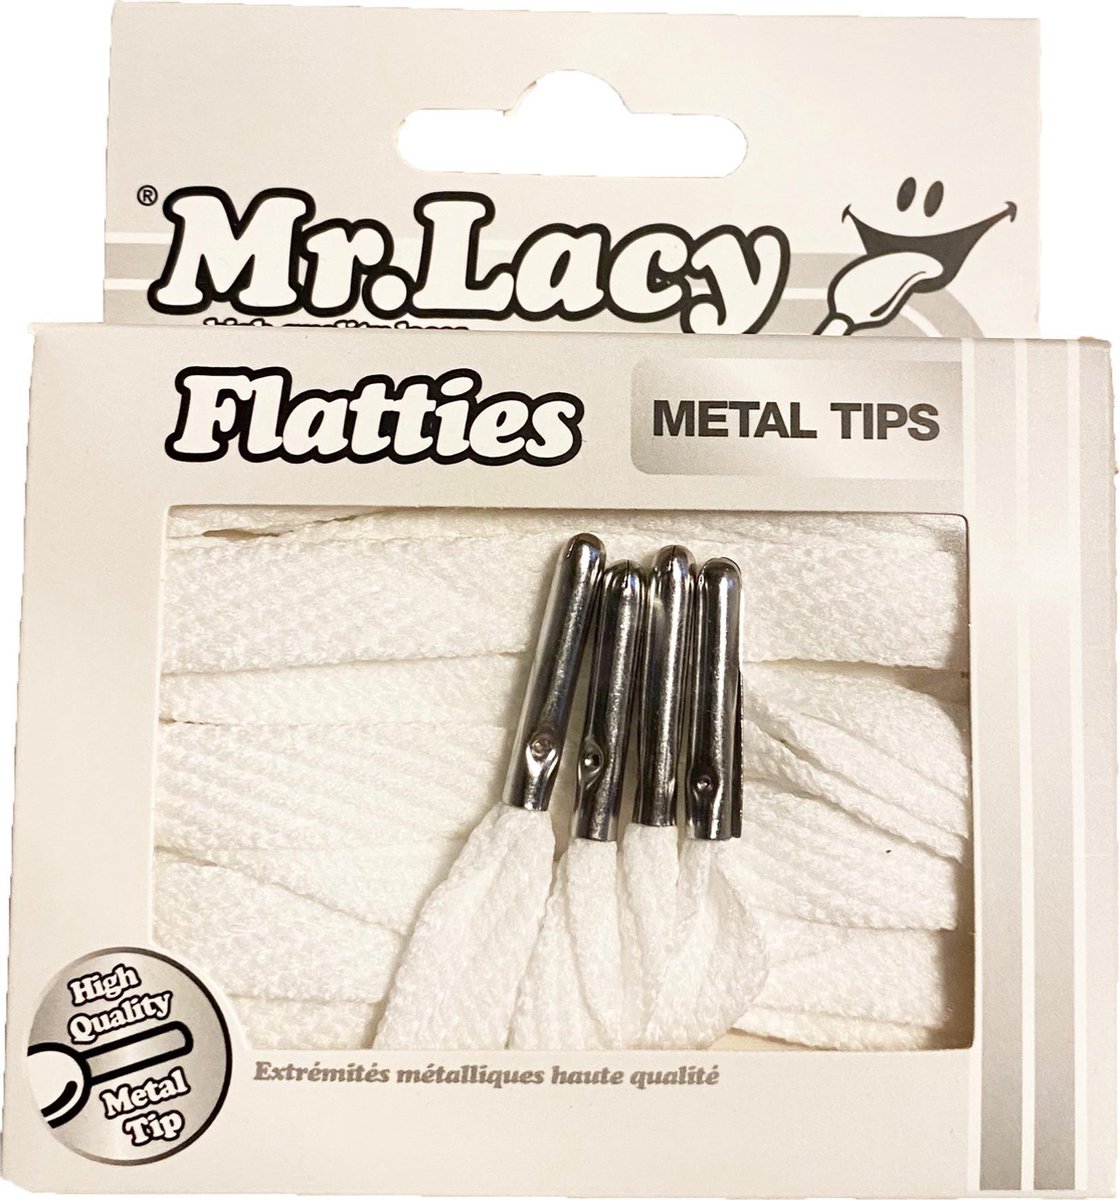 Mr Lacy Flatties wit-Metal Tips zilver metalic 130 cm lang 10mm breed High Quality